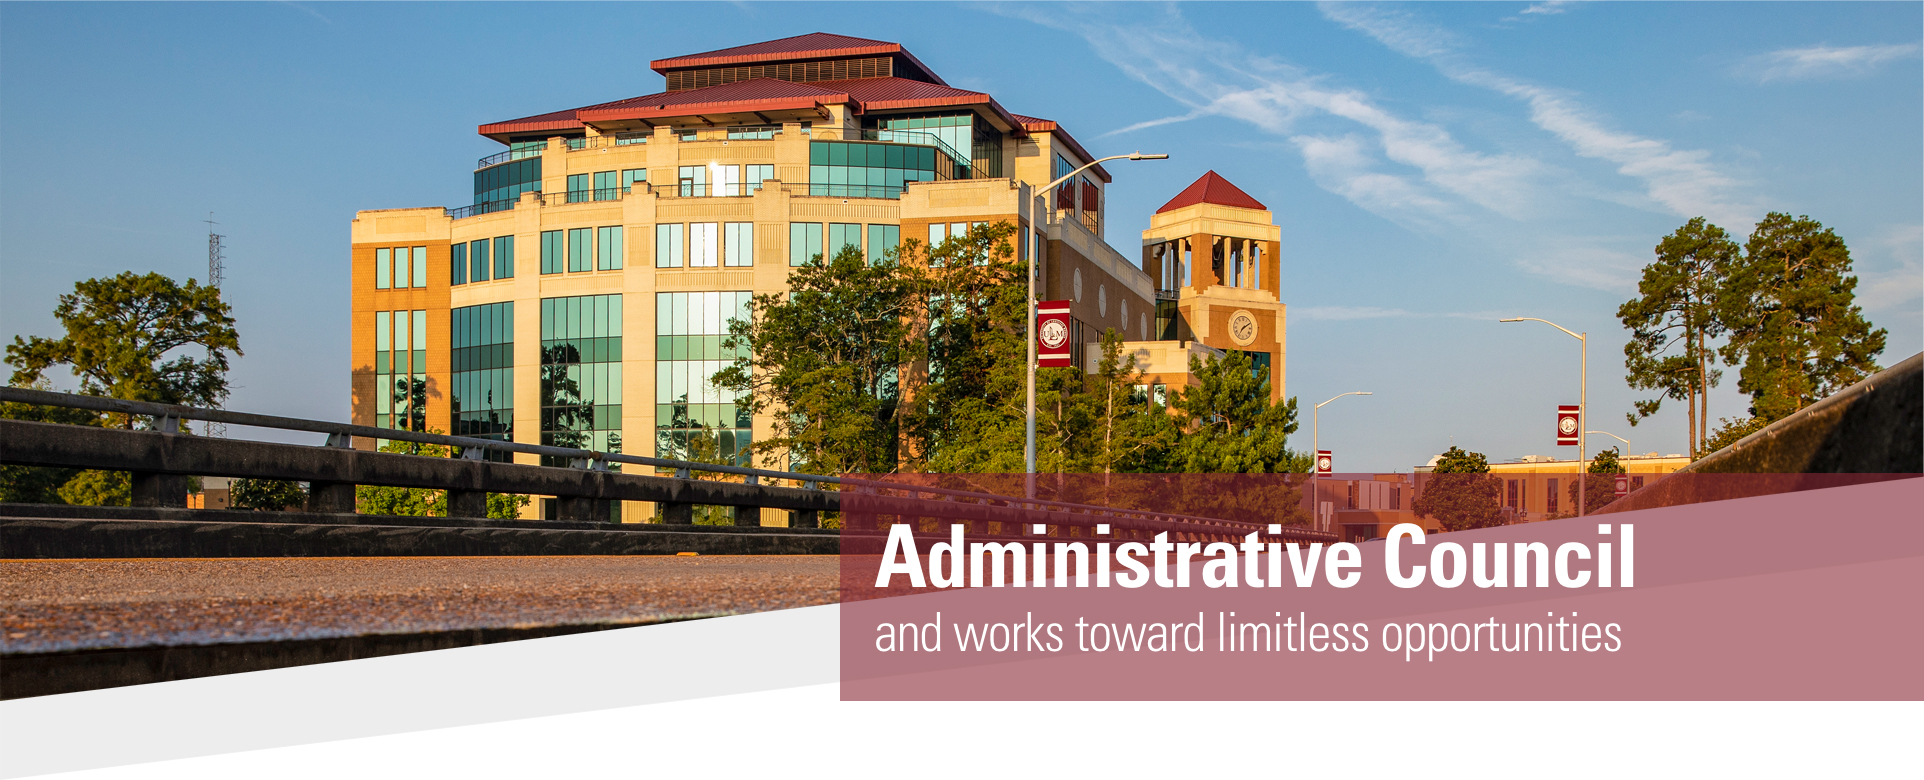 Administrative Council and works toward limitless opportunities